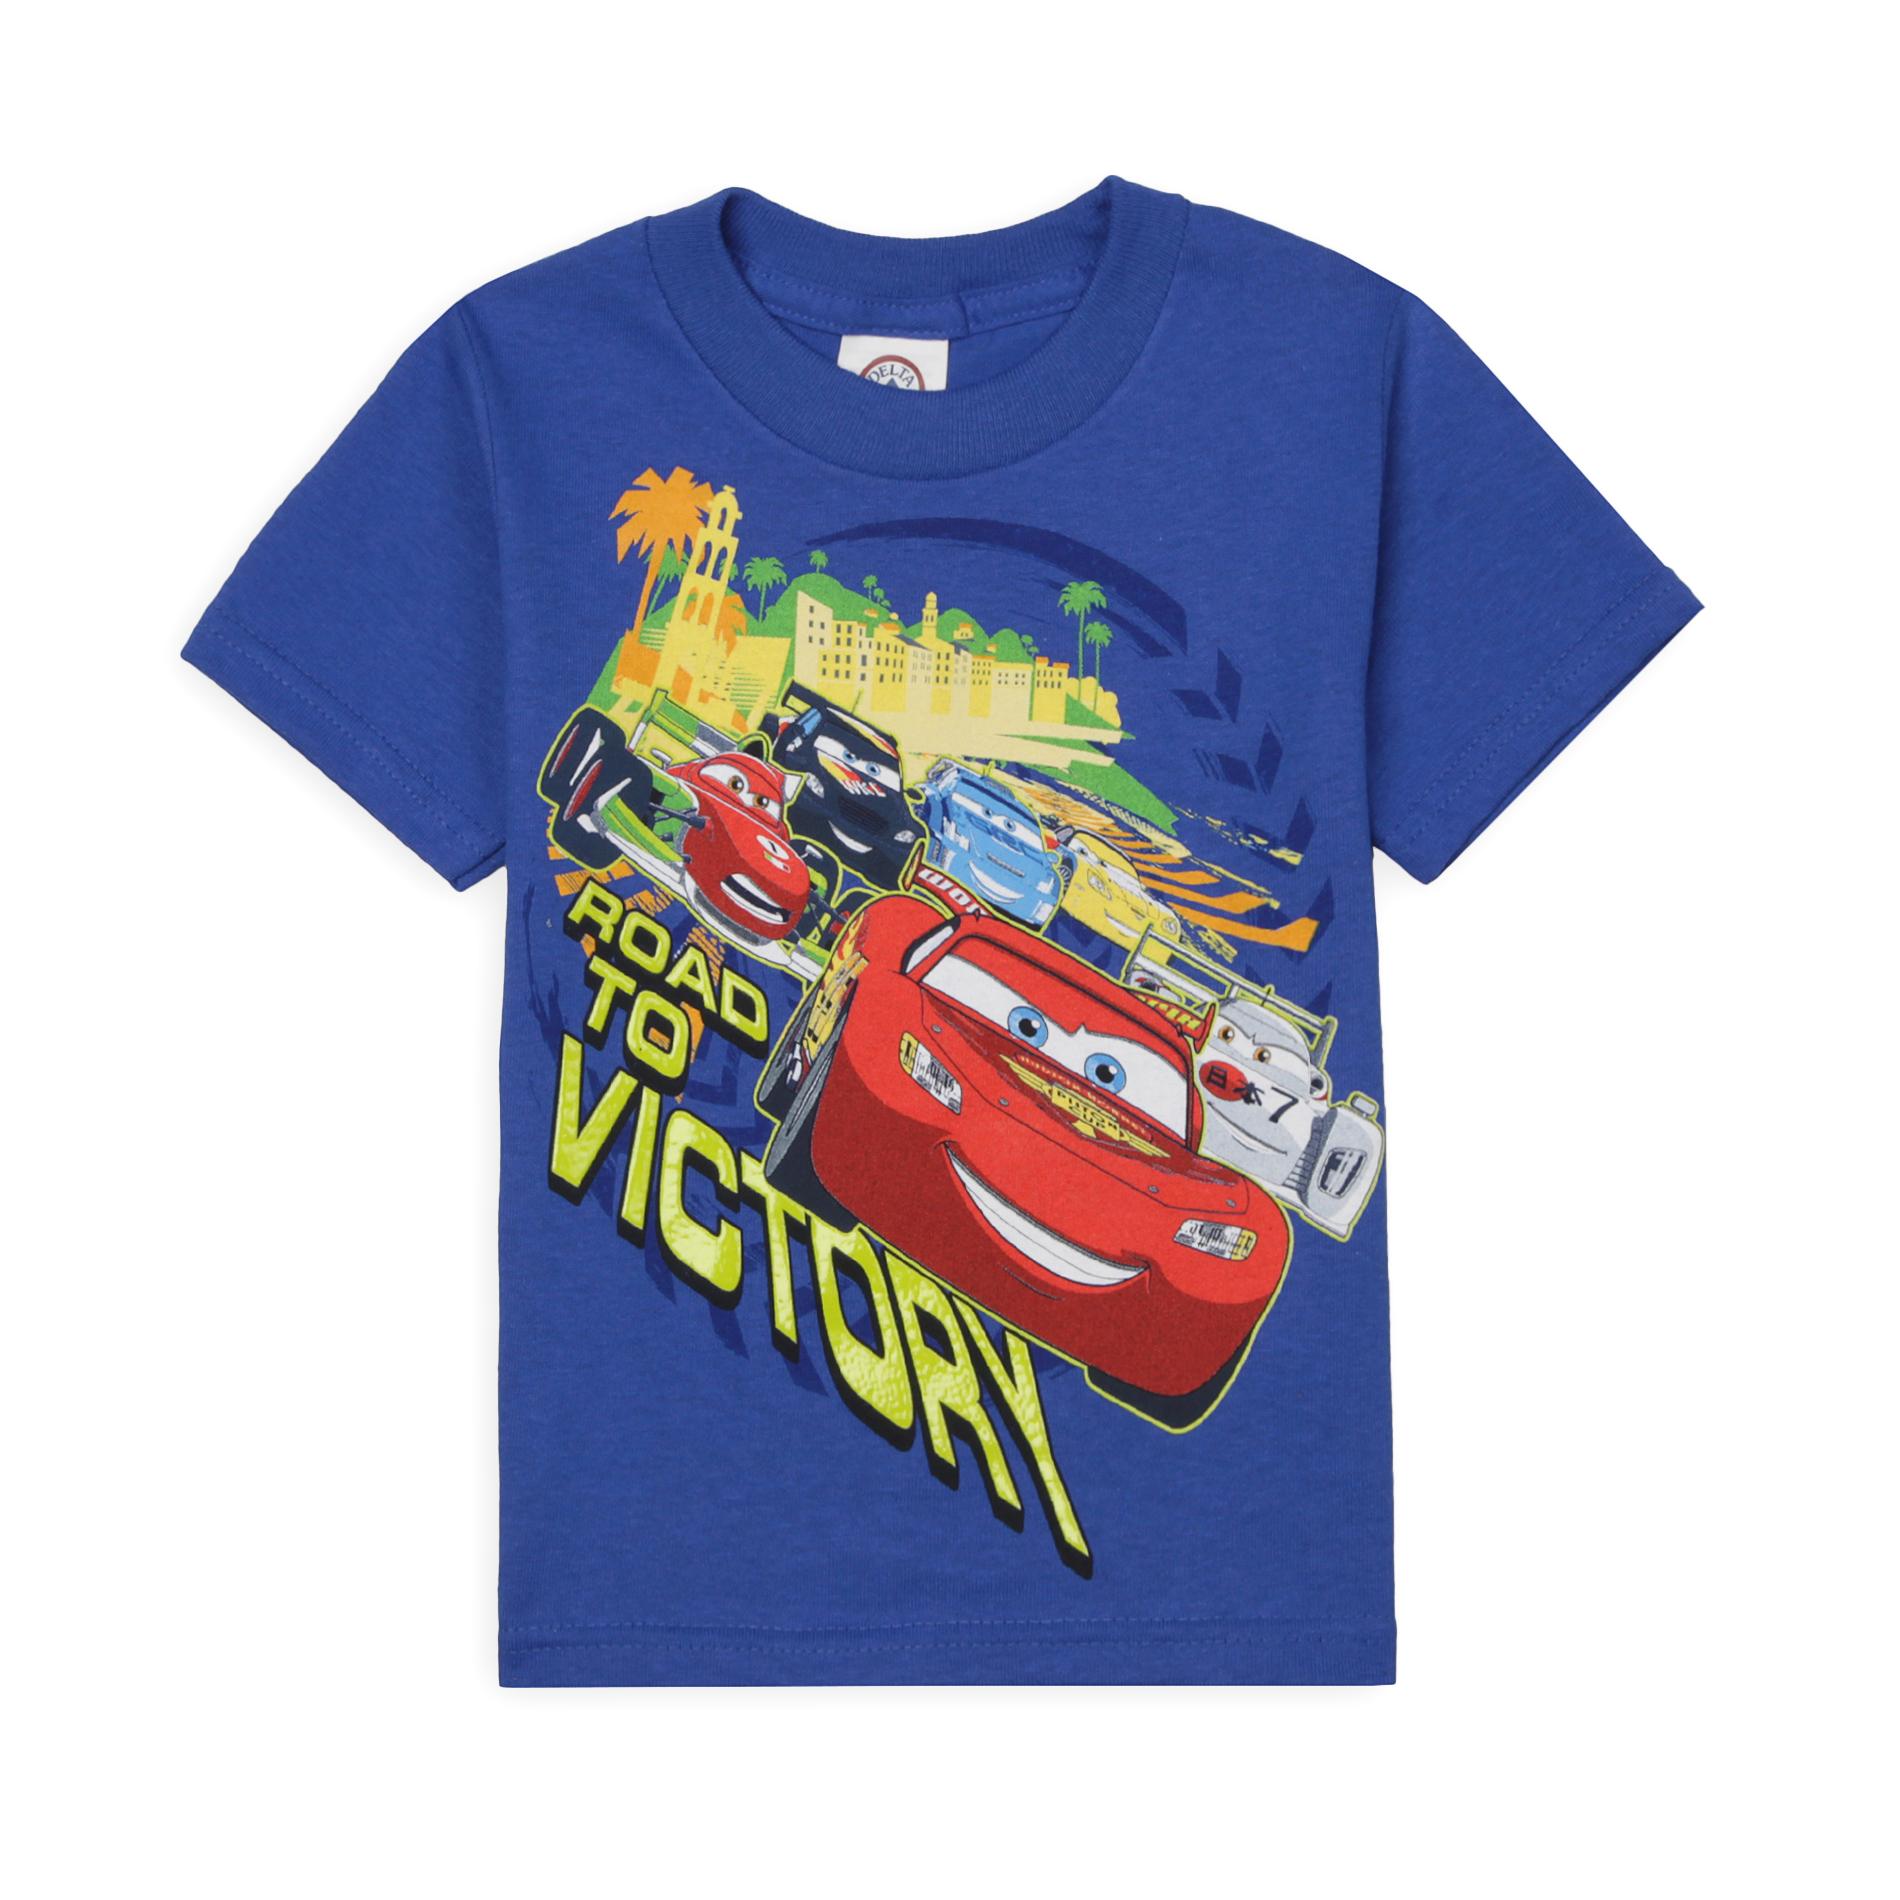 Disney Toddler Boy's Graphic T-Shirt - Road To Victory